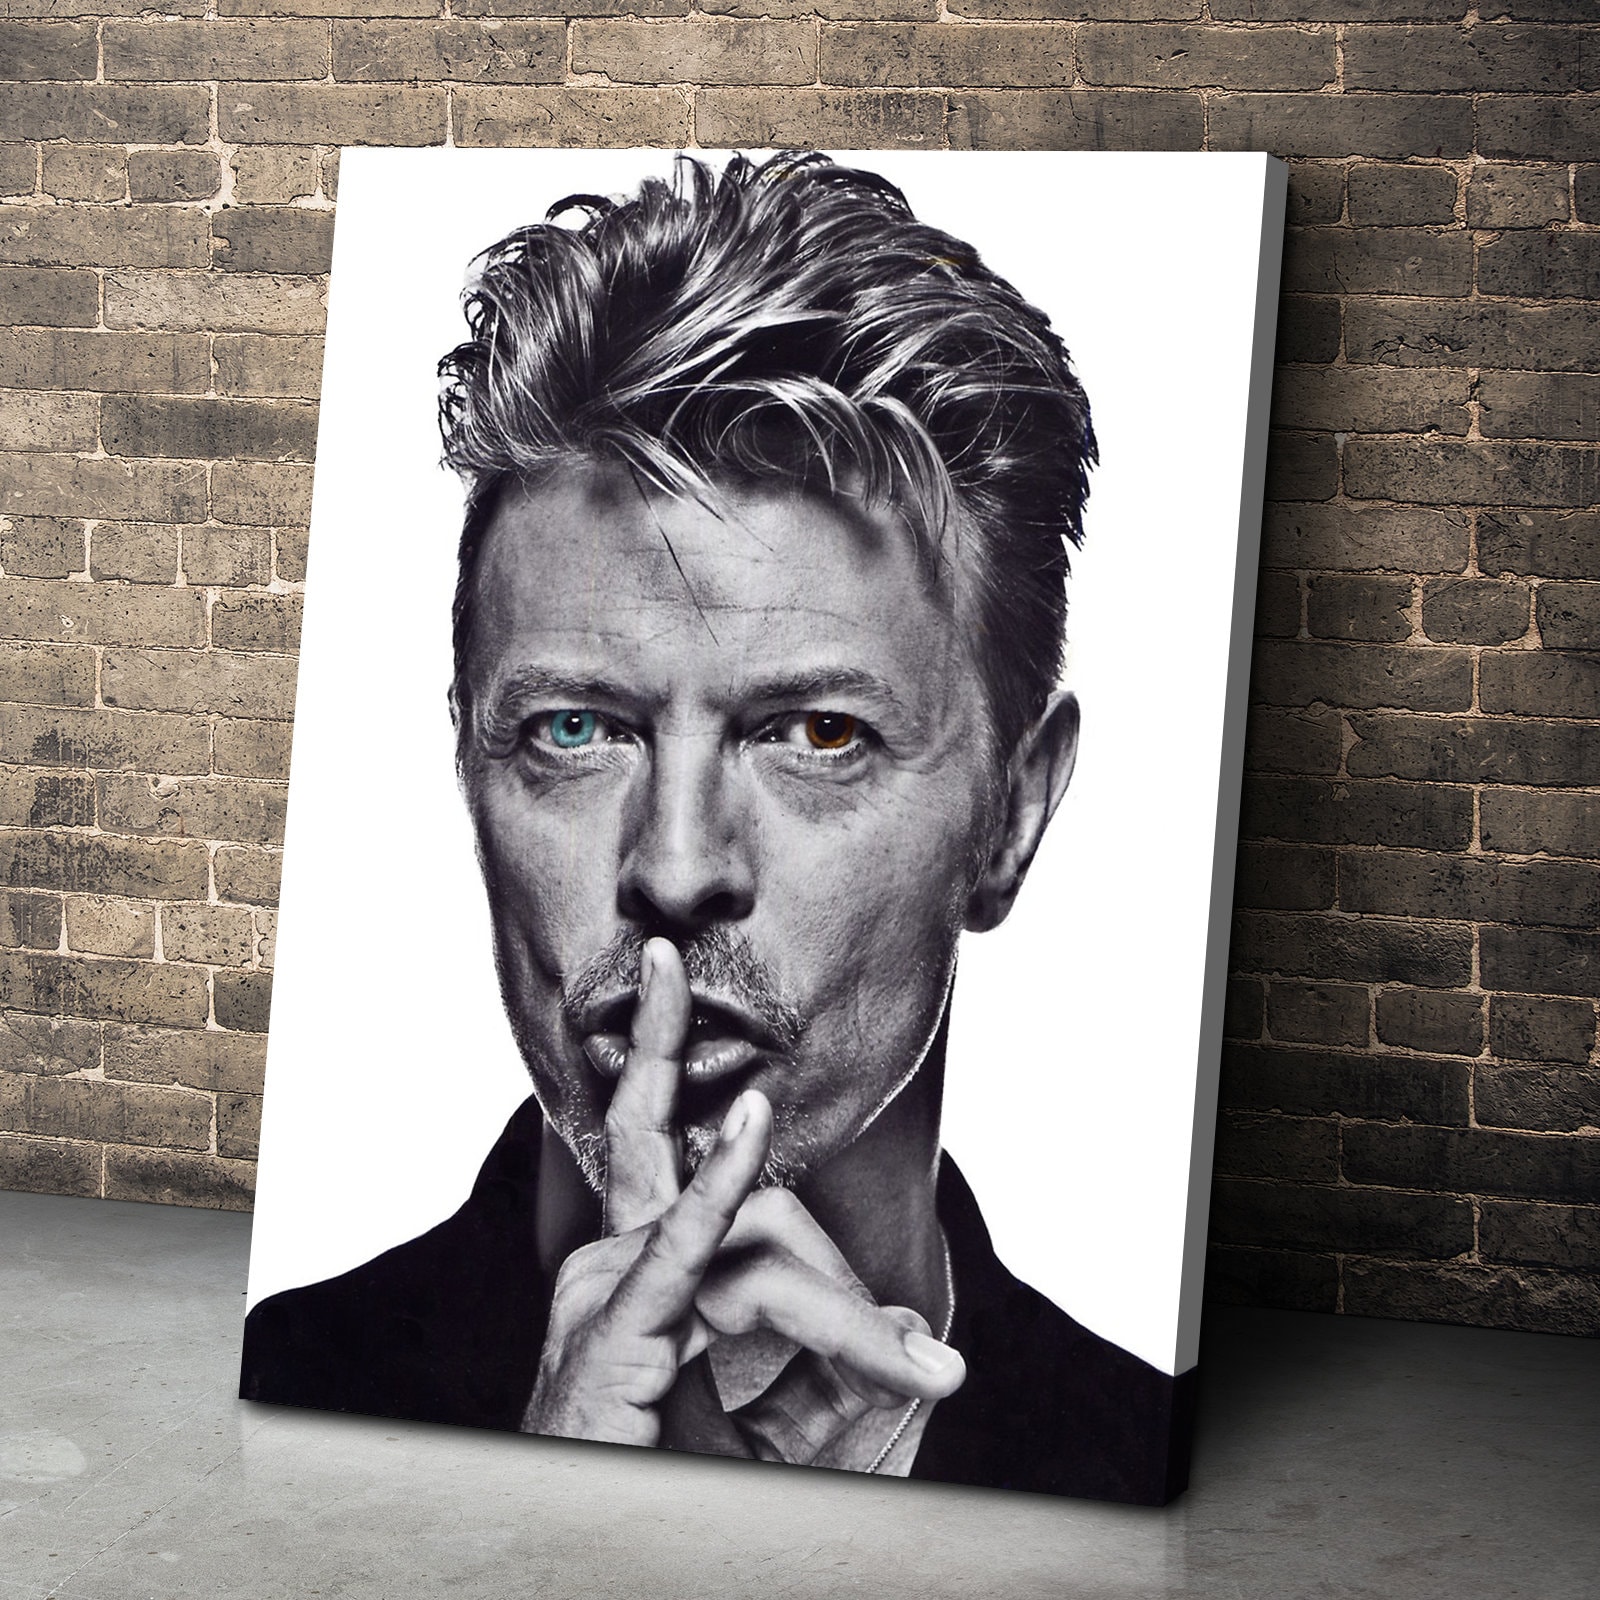 David Bowie Shhh Black and White Large Poster Art Print Gift Multiple Sizes 